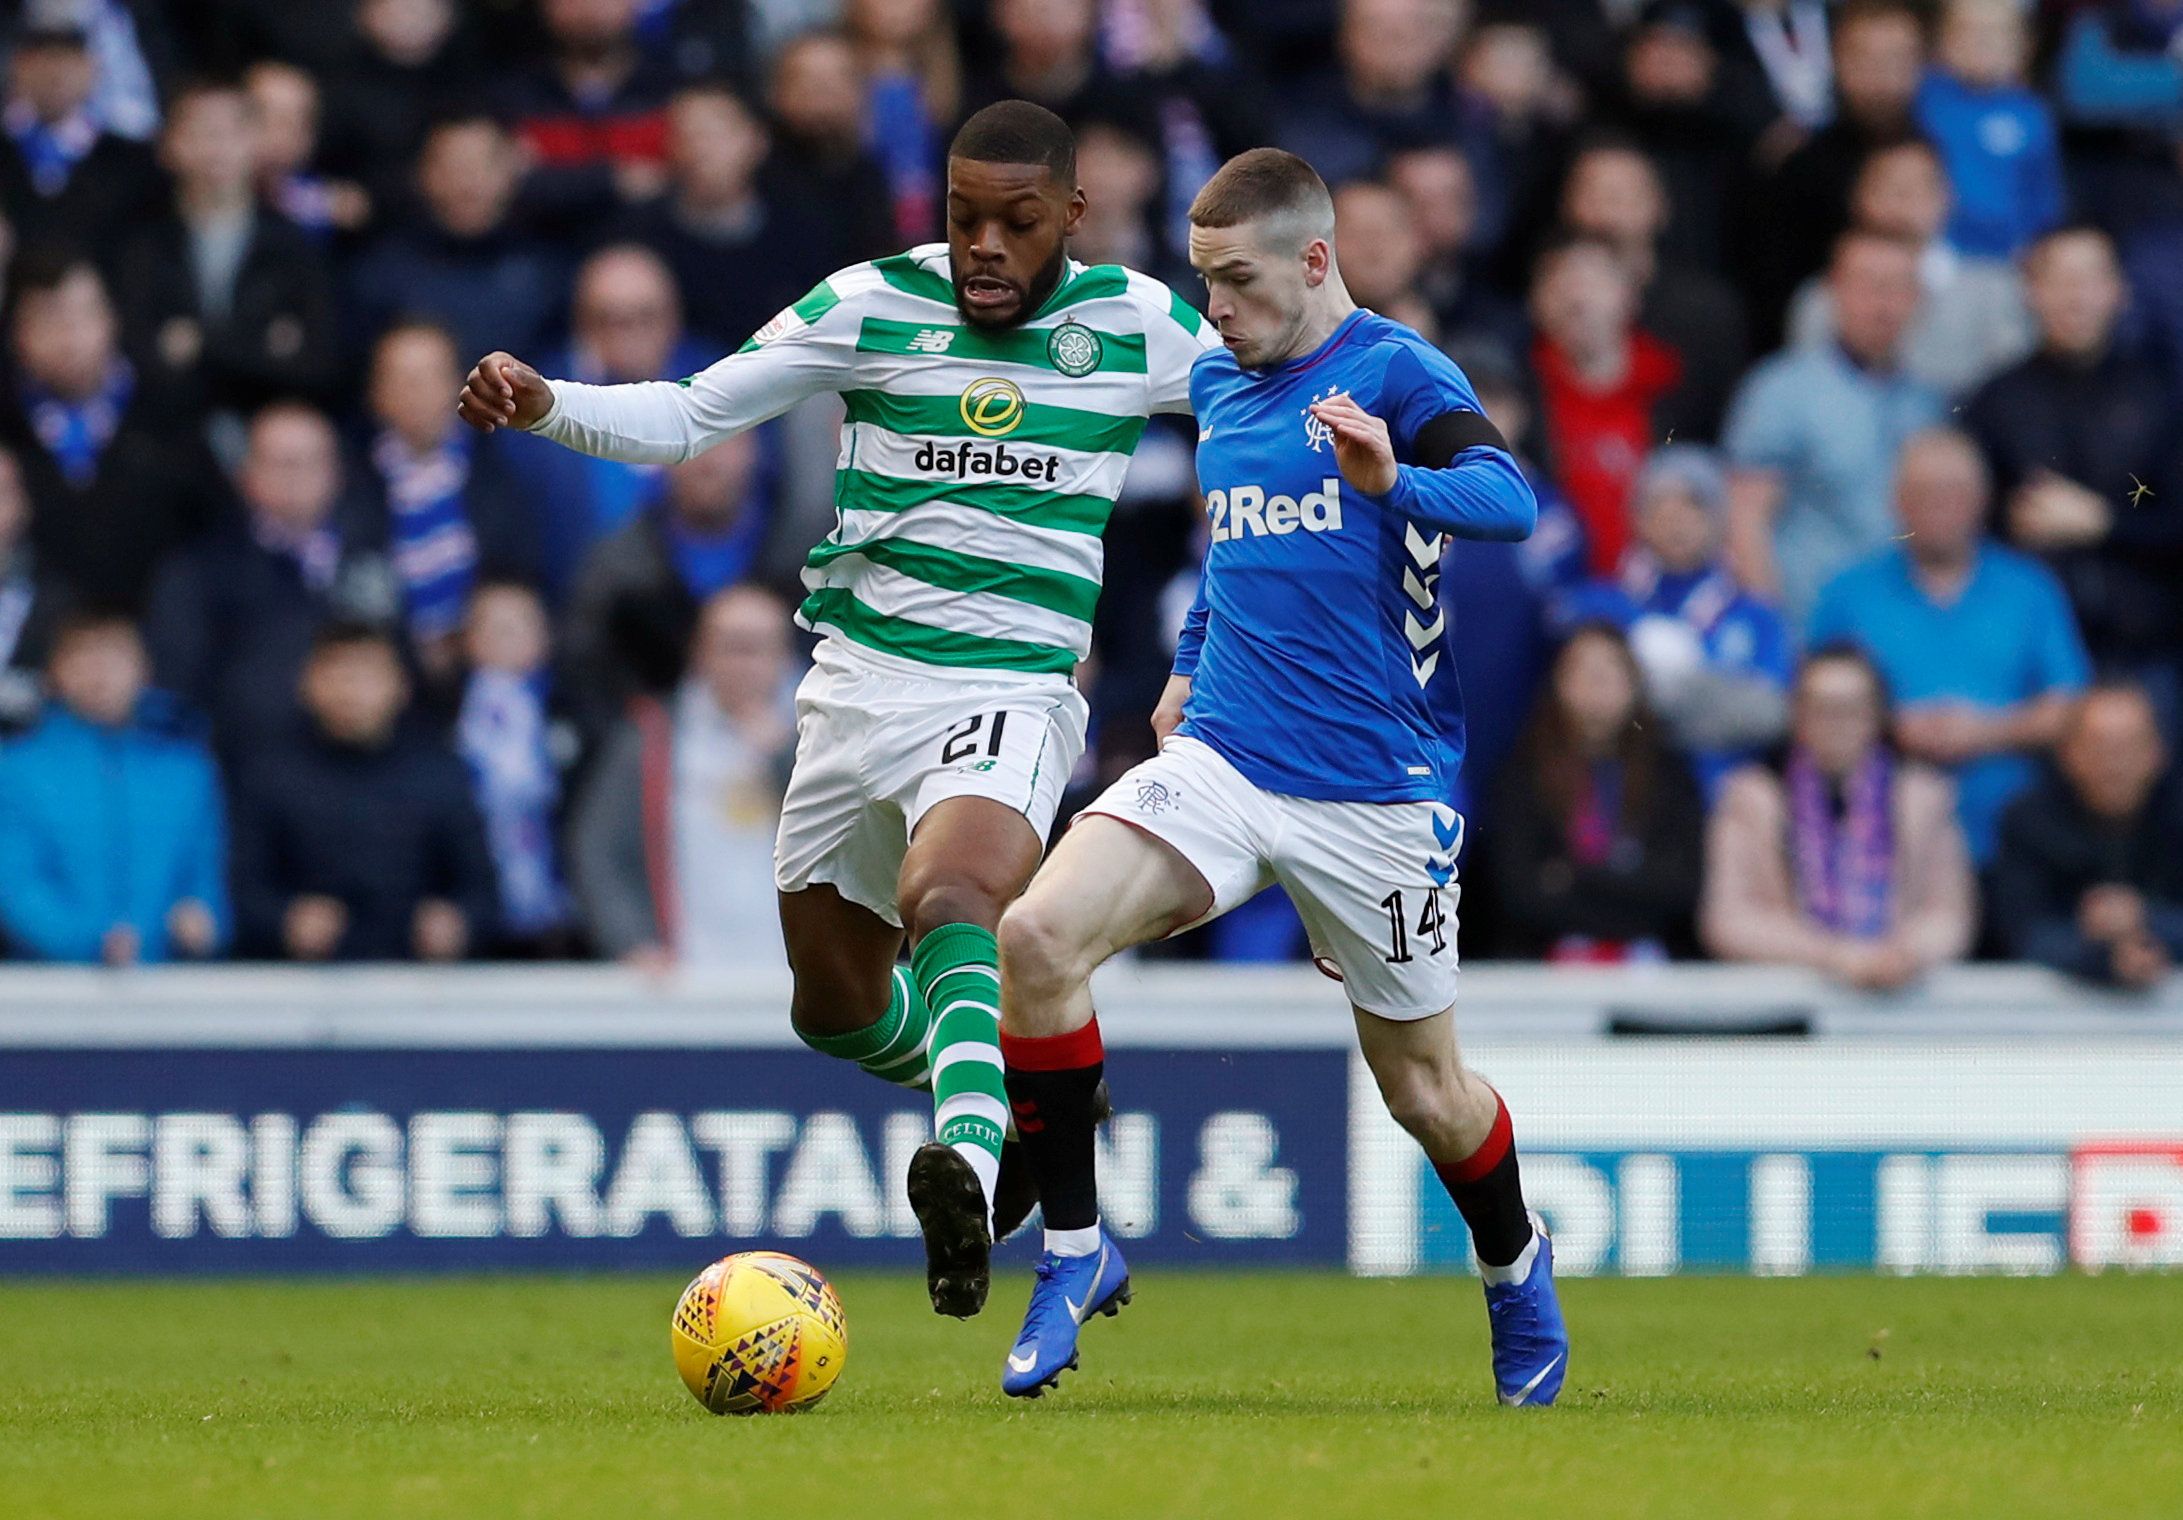 Soccer Football - Scottish Premiership - Rangers v Celtic - Ibrox, Glasgow, Britain - December 29, 2018  Celtic's Olivier Ntcham in action with Rangers' Ryan Kent      REUTERS/Russell Cheyne